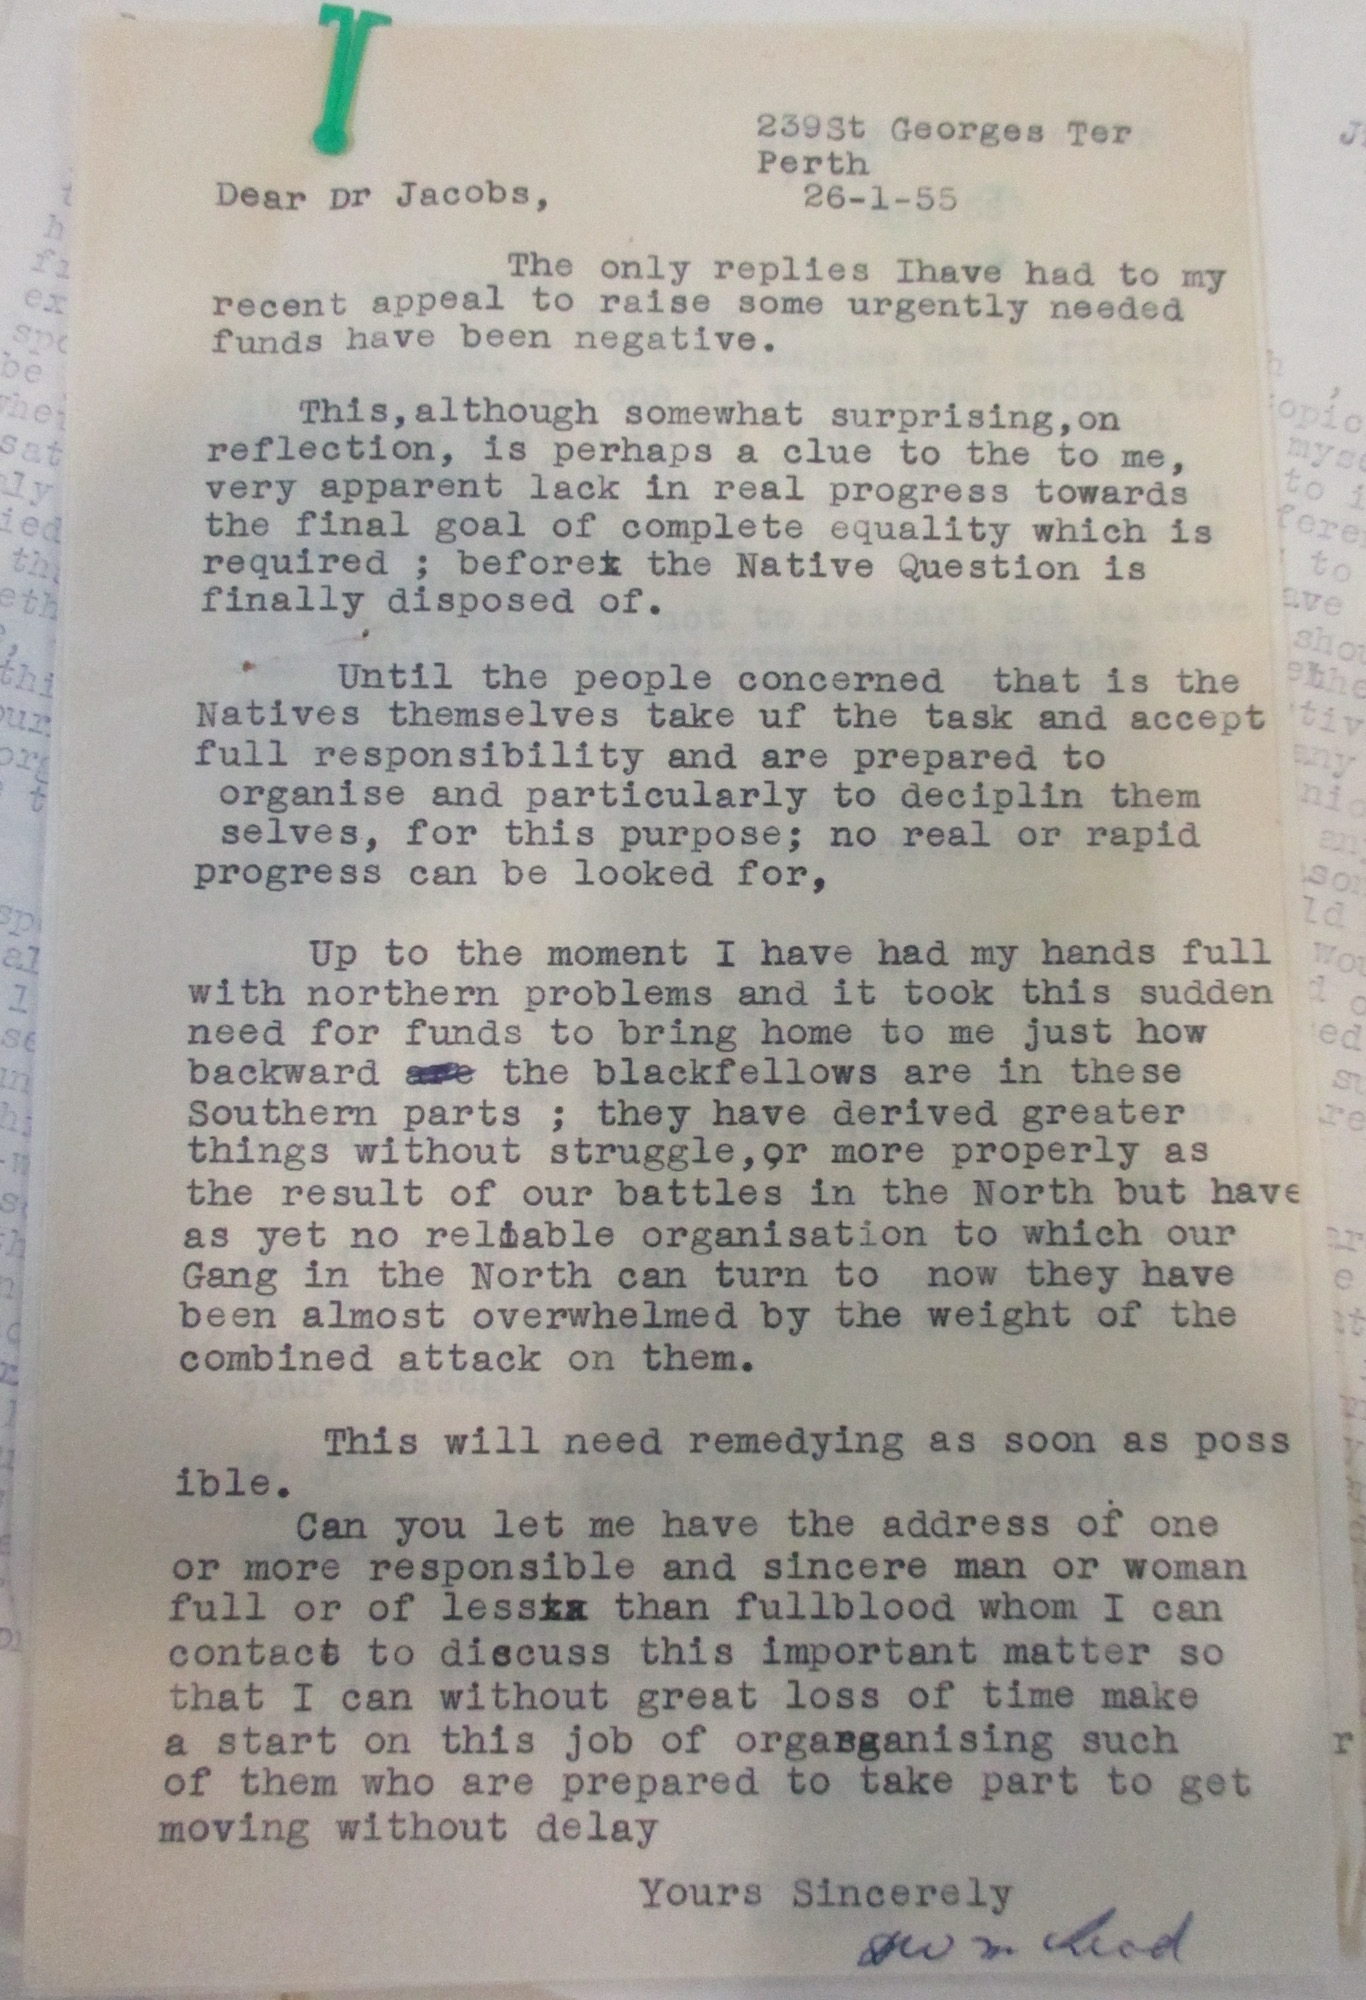 Don McLeod to Alfred Jacobs, 26 January 1955